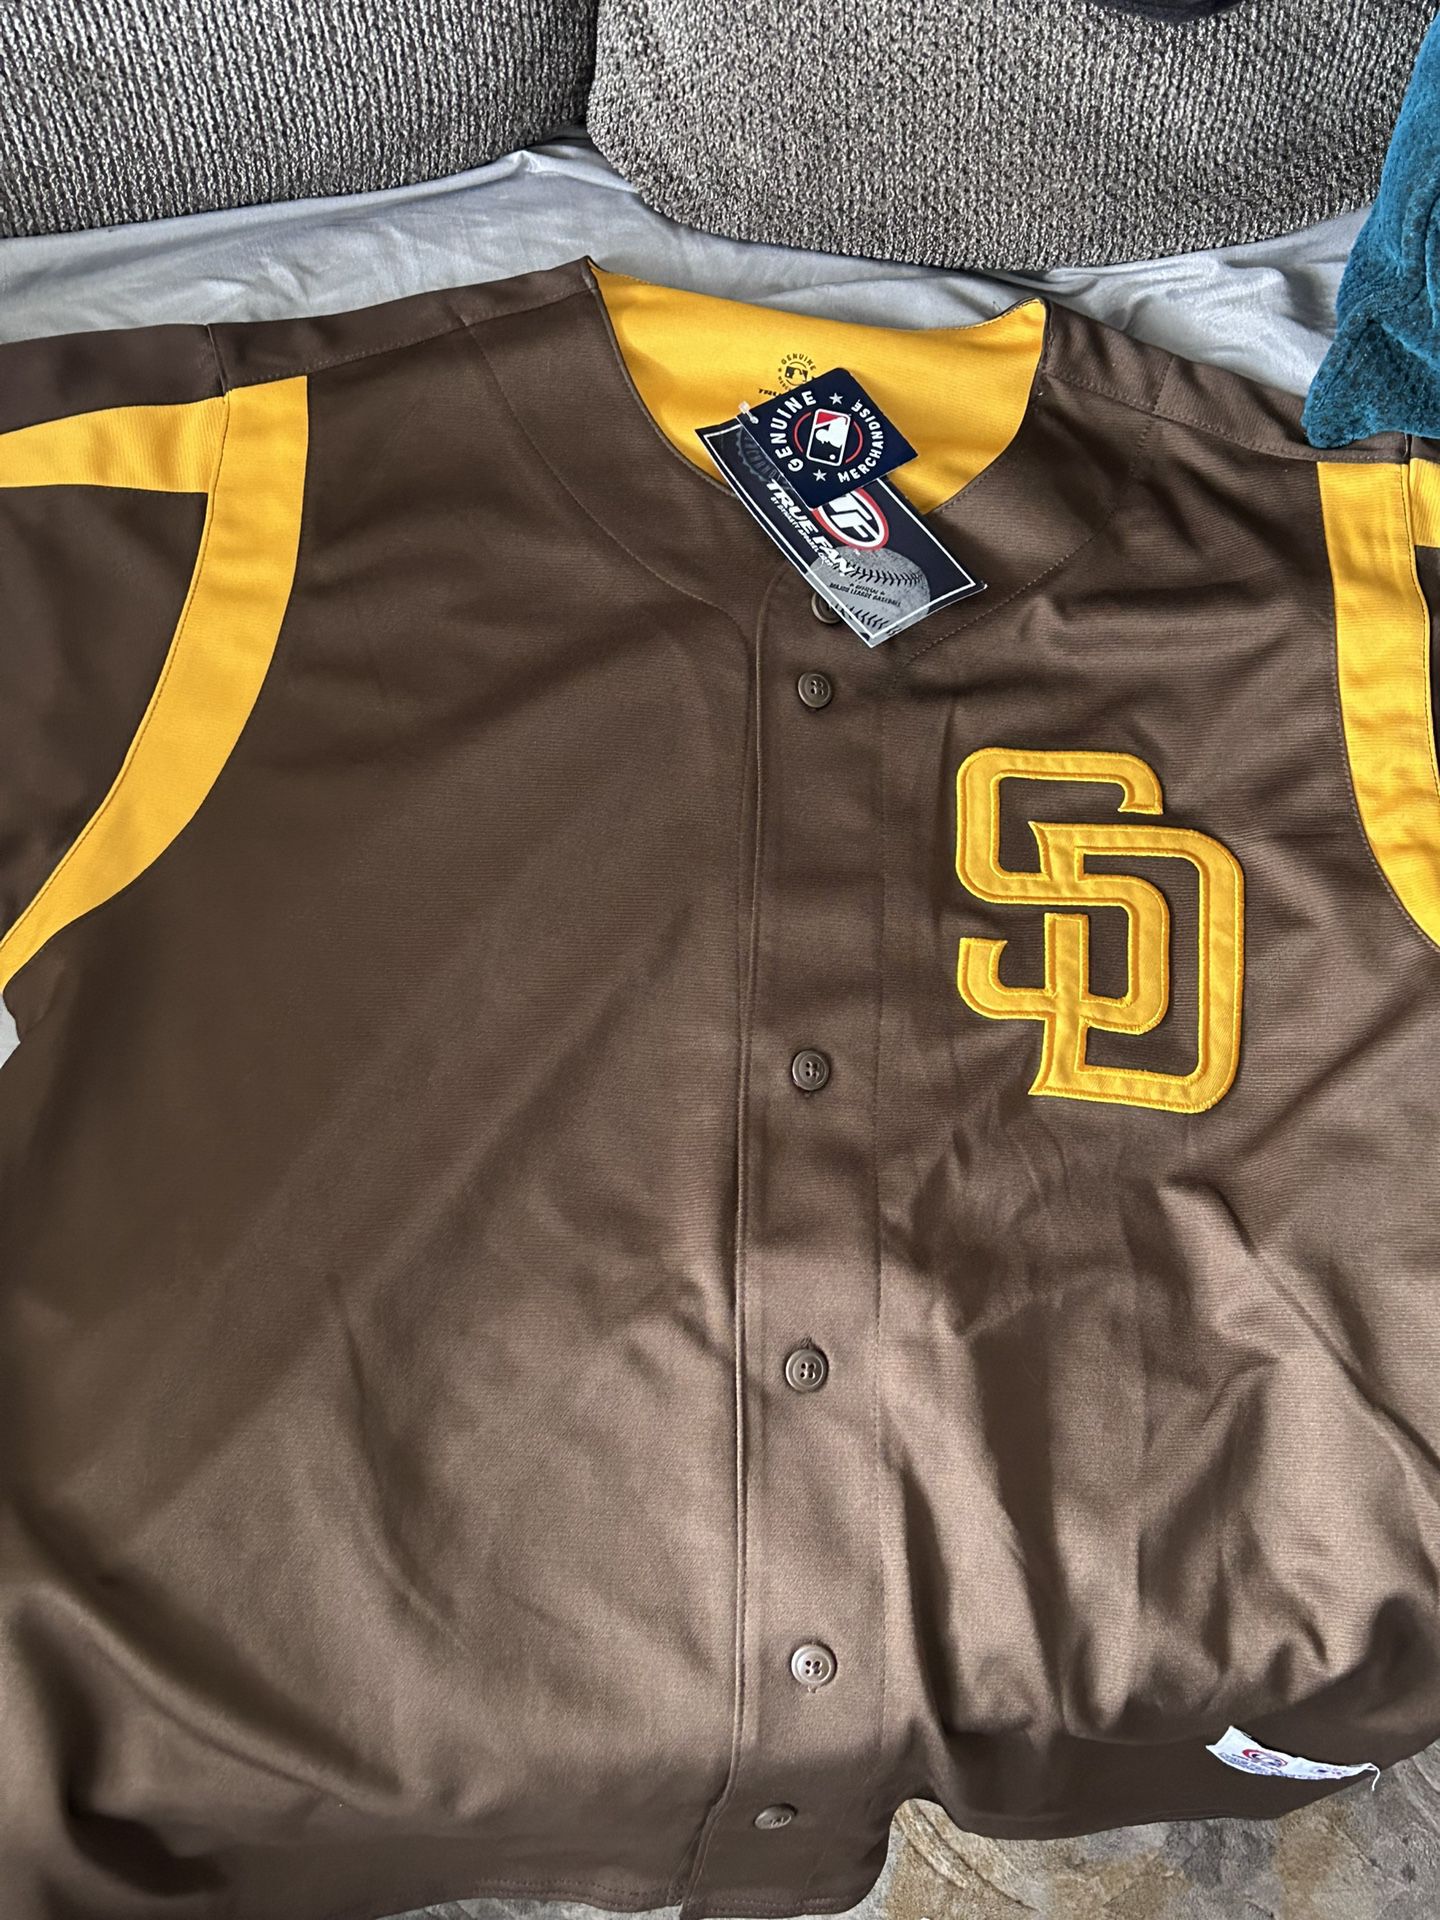 Padres Jerseys for Sale in San Diego, CA - OfferUp